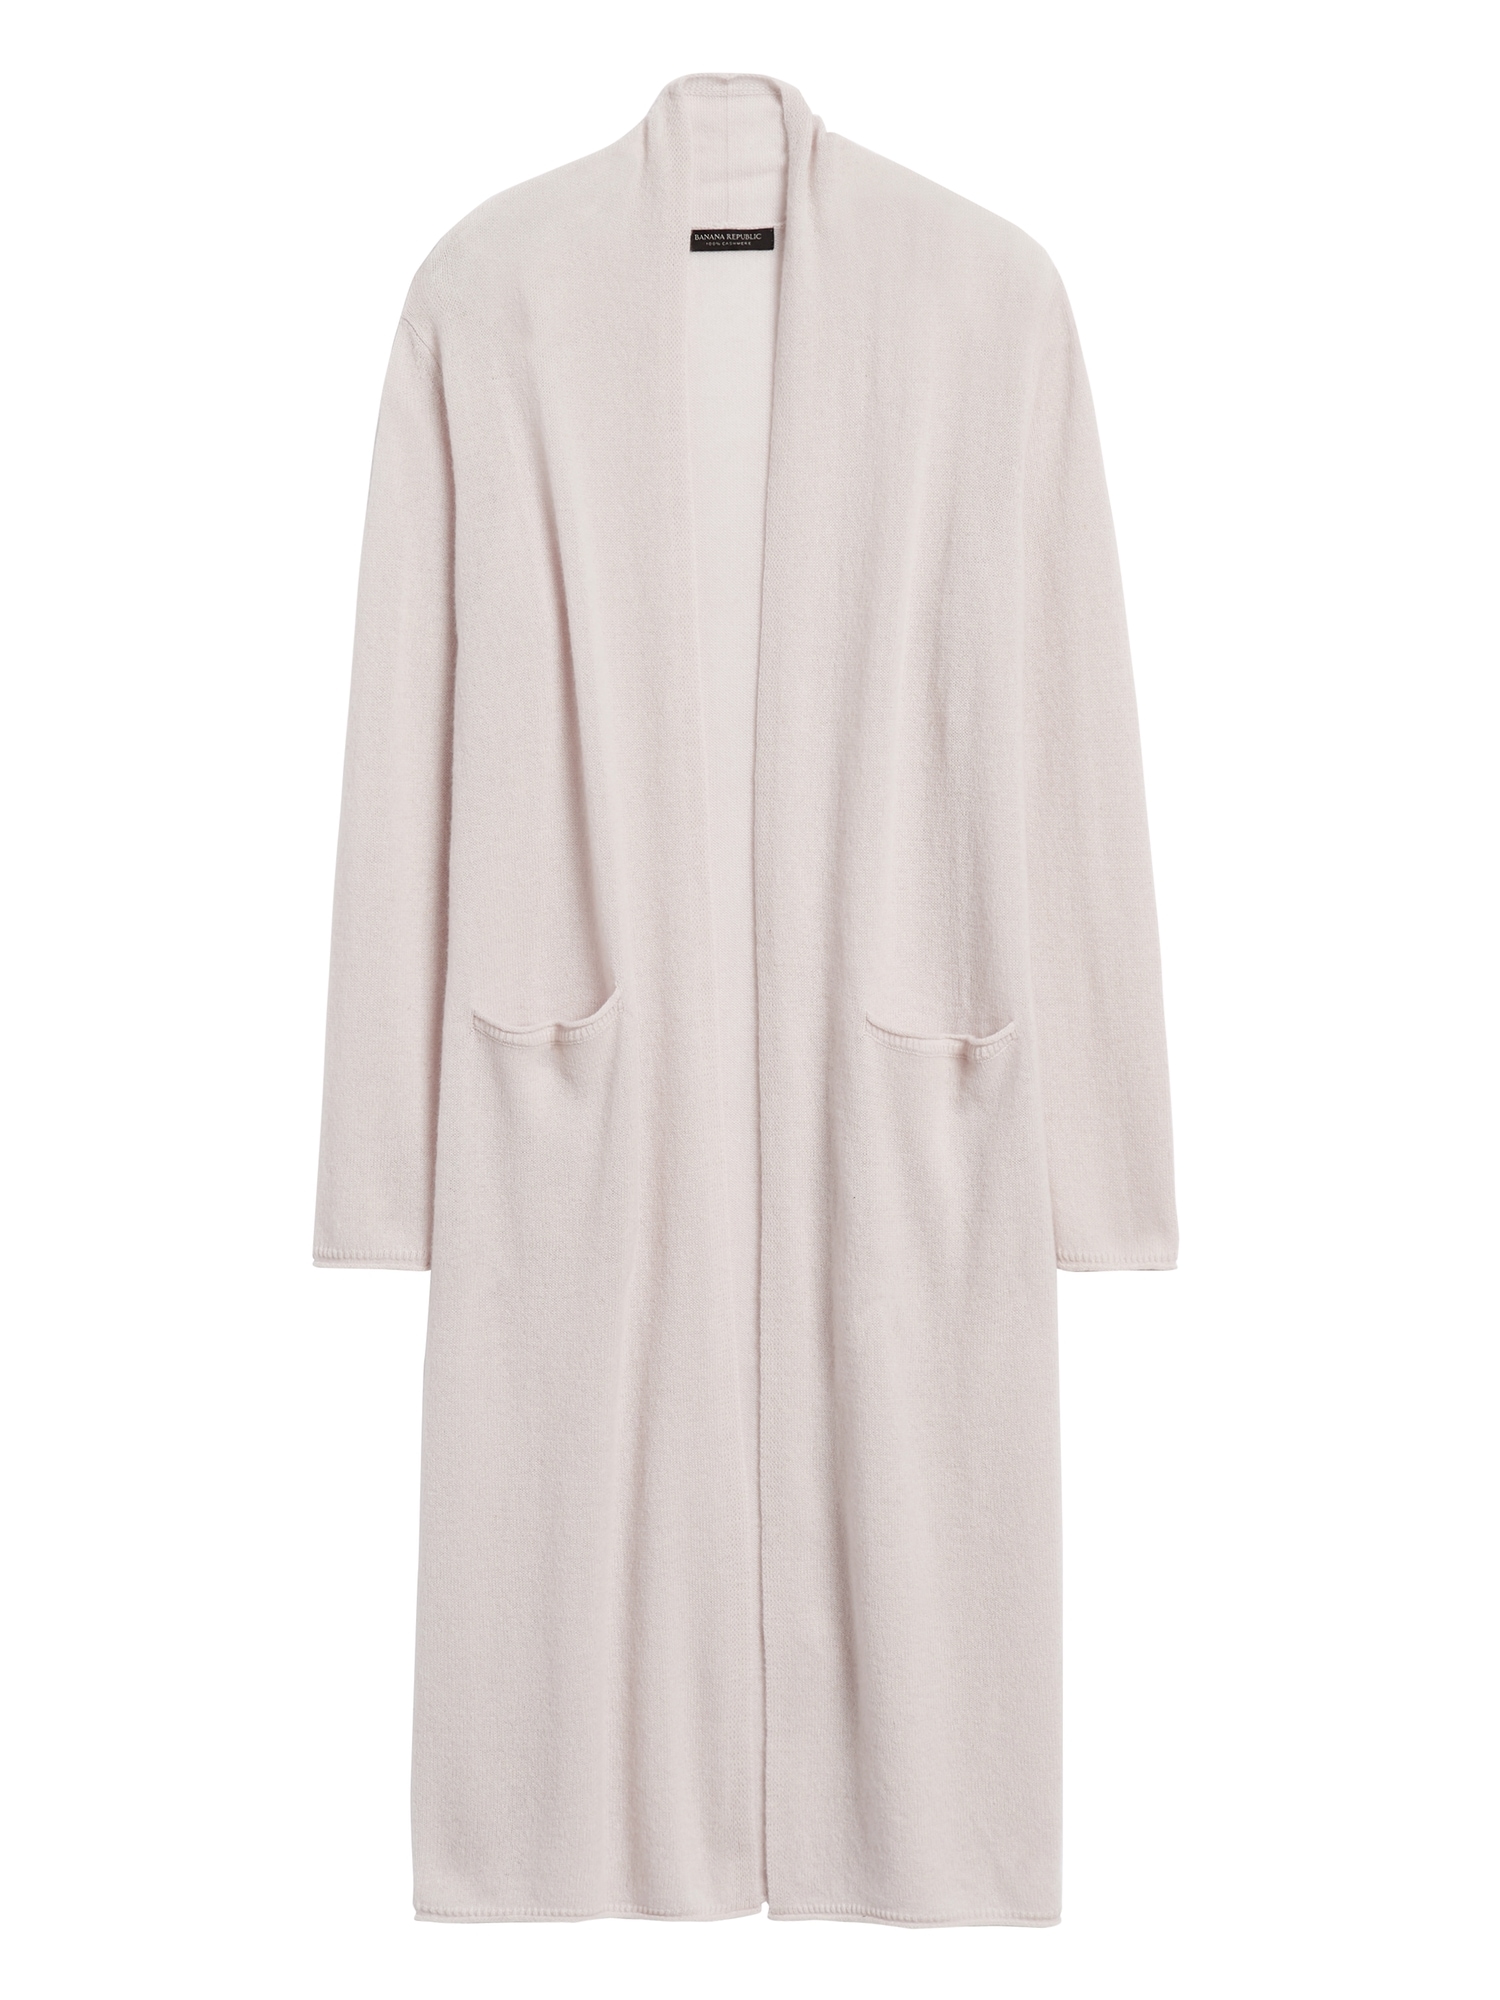 Cashmere Duster Cardigan Sweater